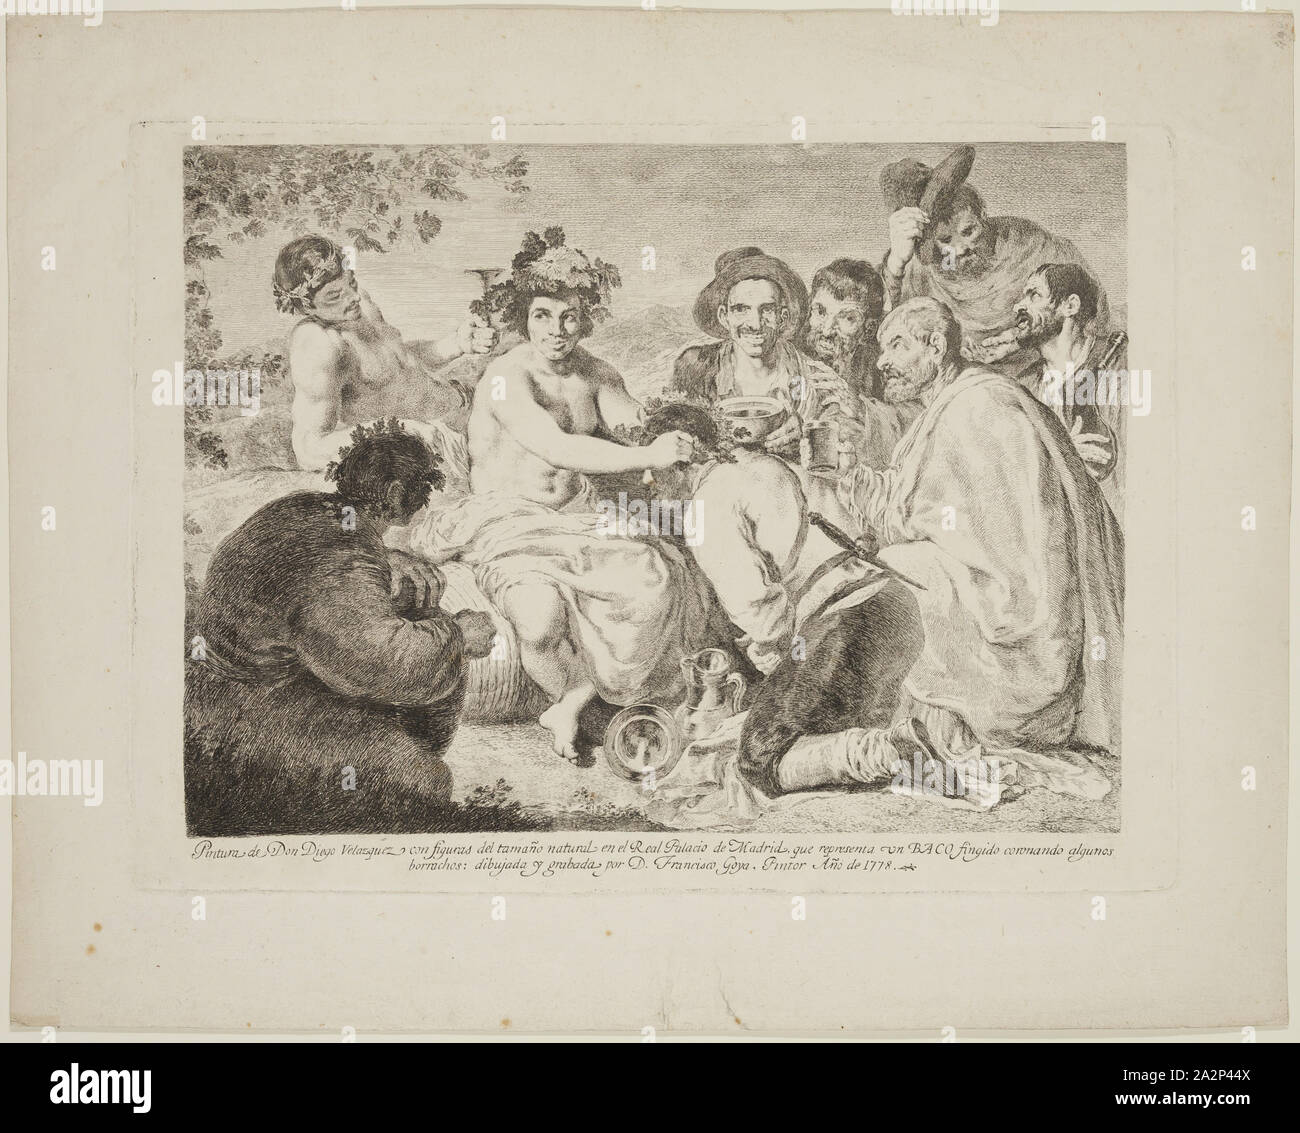 Francisco Goya, Spanish, 1746-1828, after Diego Rodríguez de Silva Velázquez, Spanish, 1599-1660, A False Bacchus Crowning Some Drunkards, ca. 1778, etching printed in black ink on laid paper, Plate: 12 5/8 × 17 1/8 inches (32.1 × 43.5 cm Stock Photo